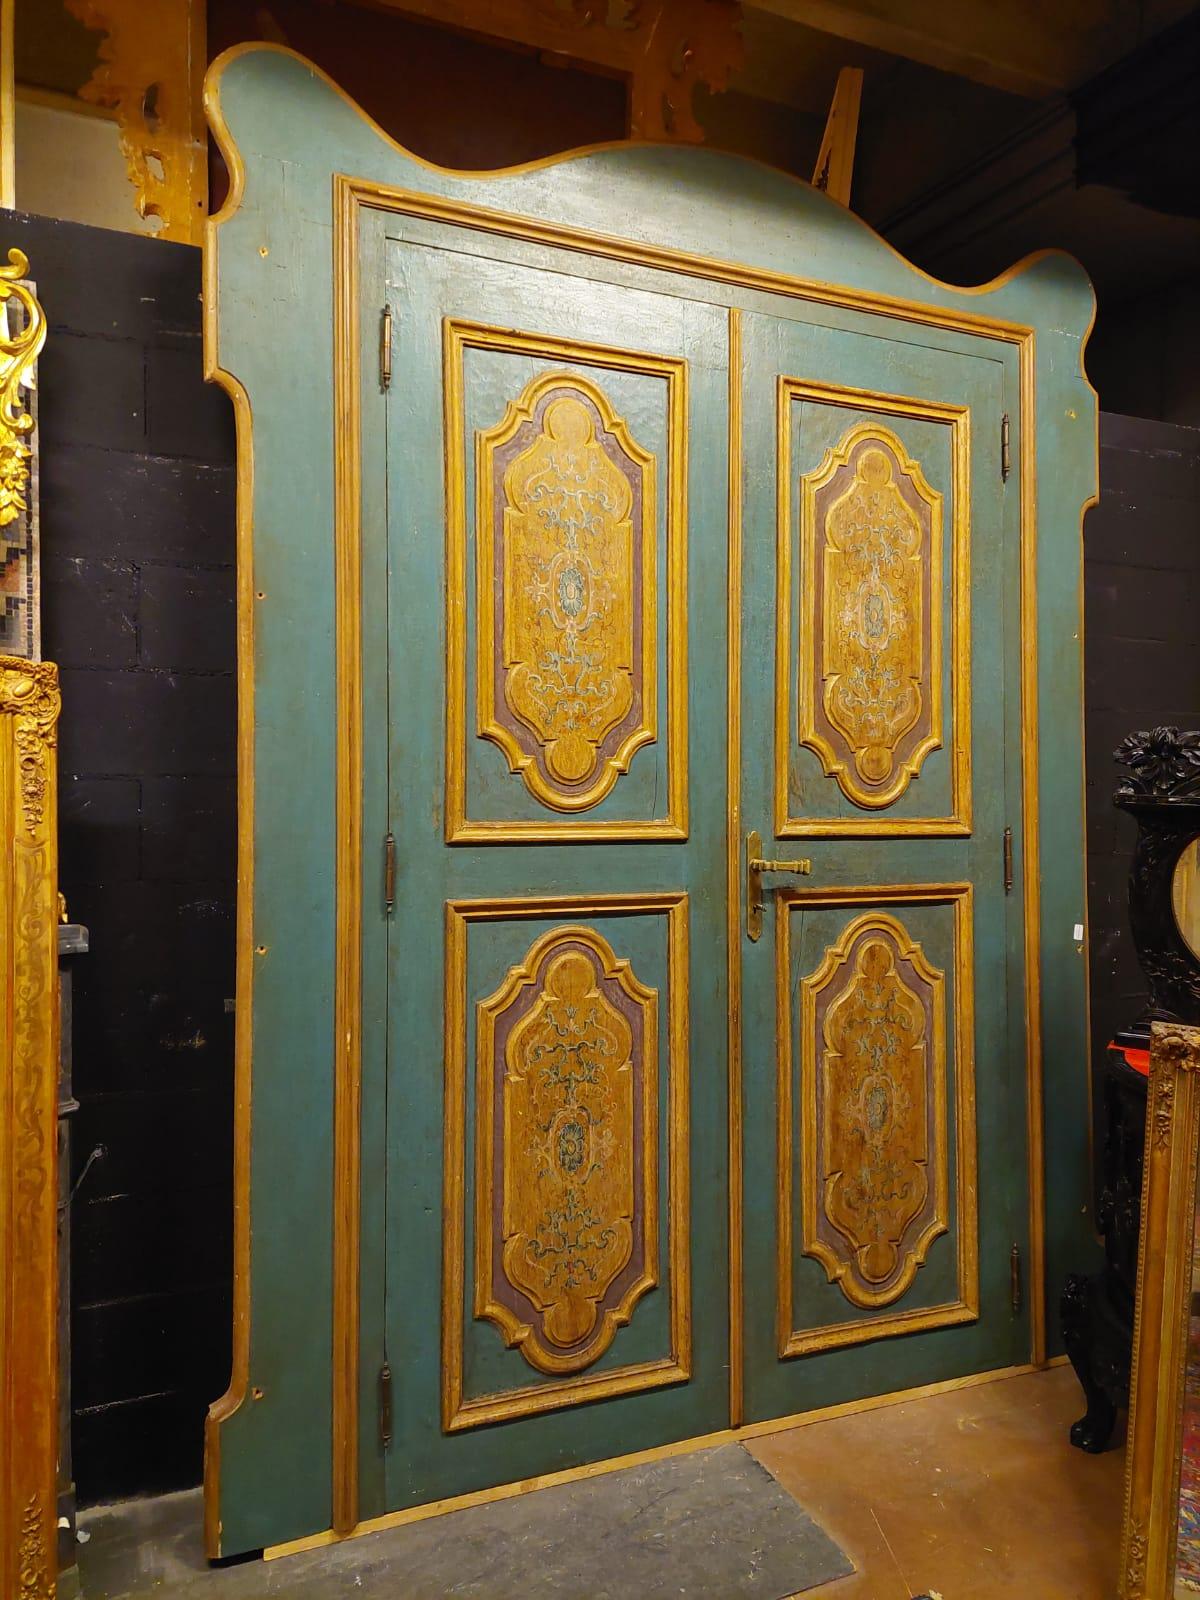 Ancient internal door or wall cabinet, formed by two doors with original wavy frame, hand painted and lacquered with predominant green and yellow colors, built, sculpted and lacquered entirely by hand in the 18th century, for an important building